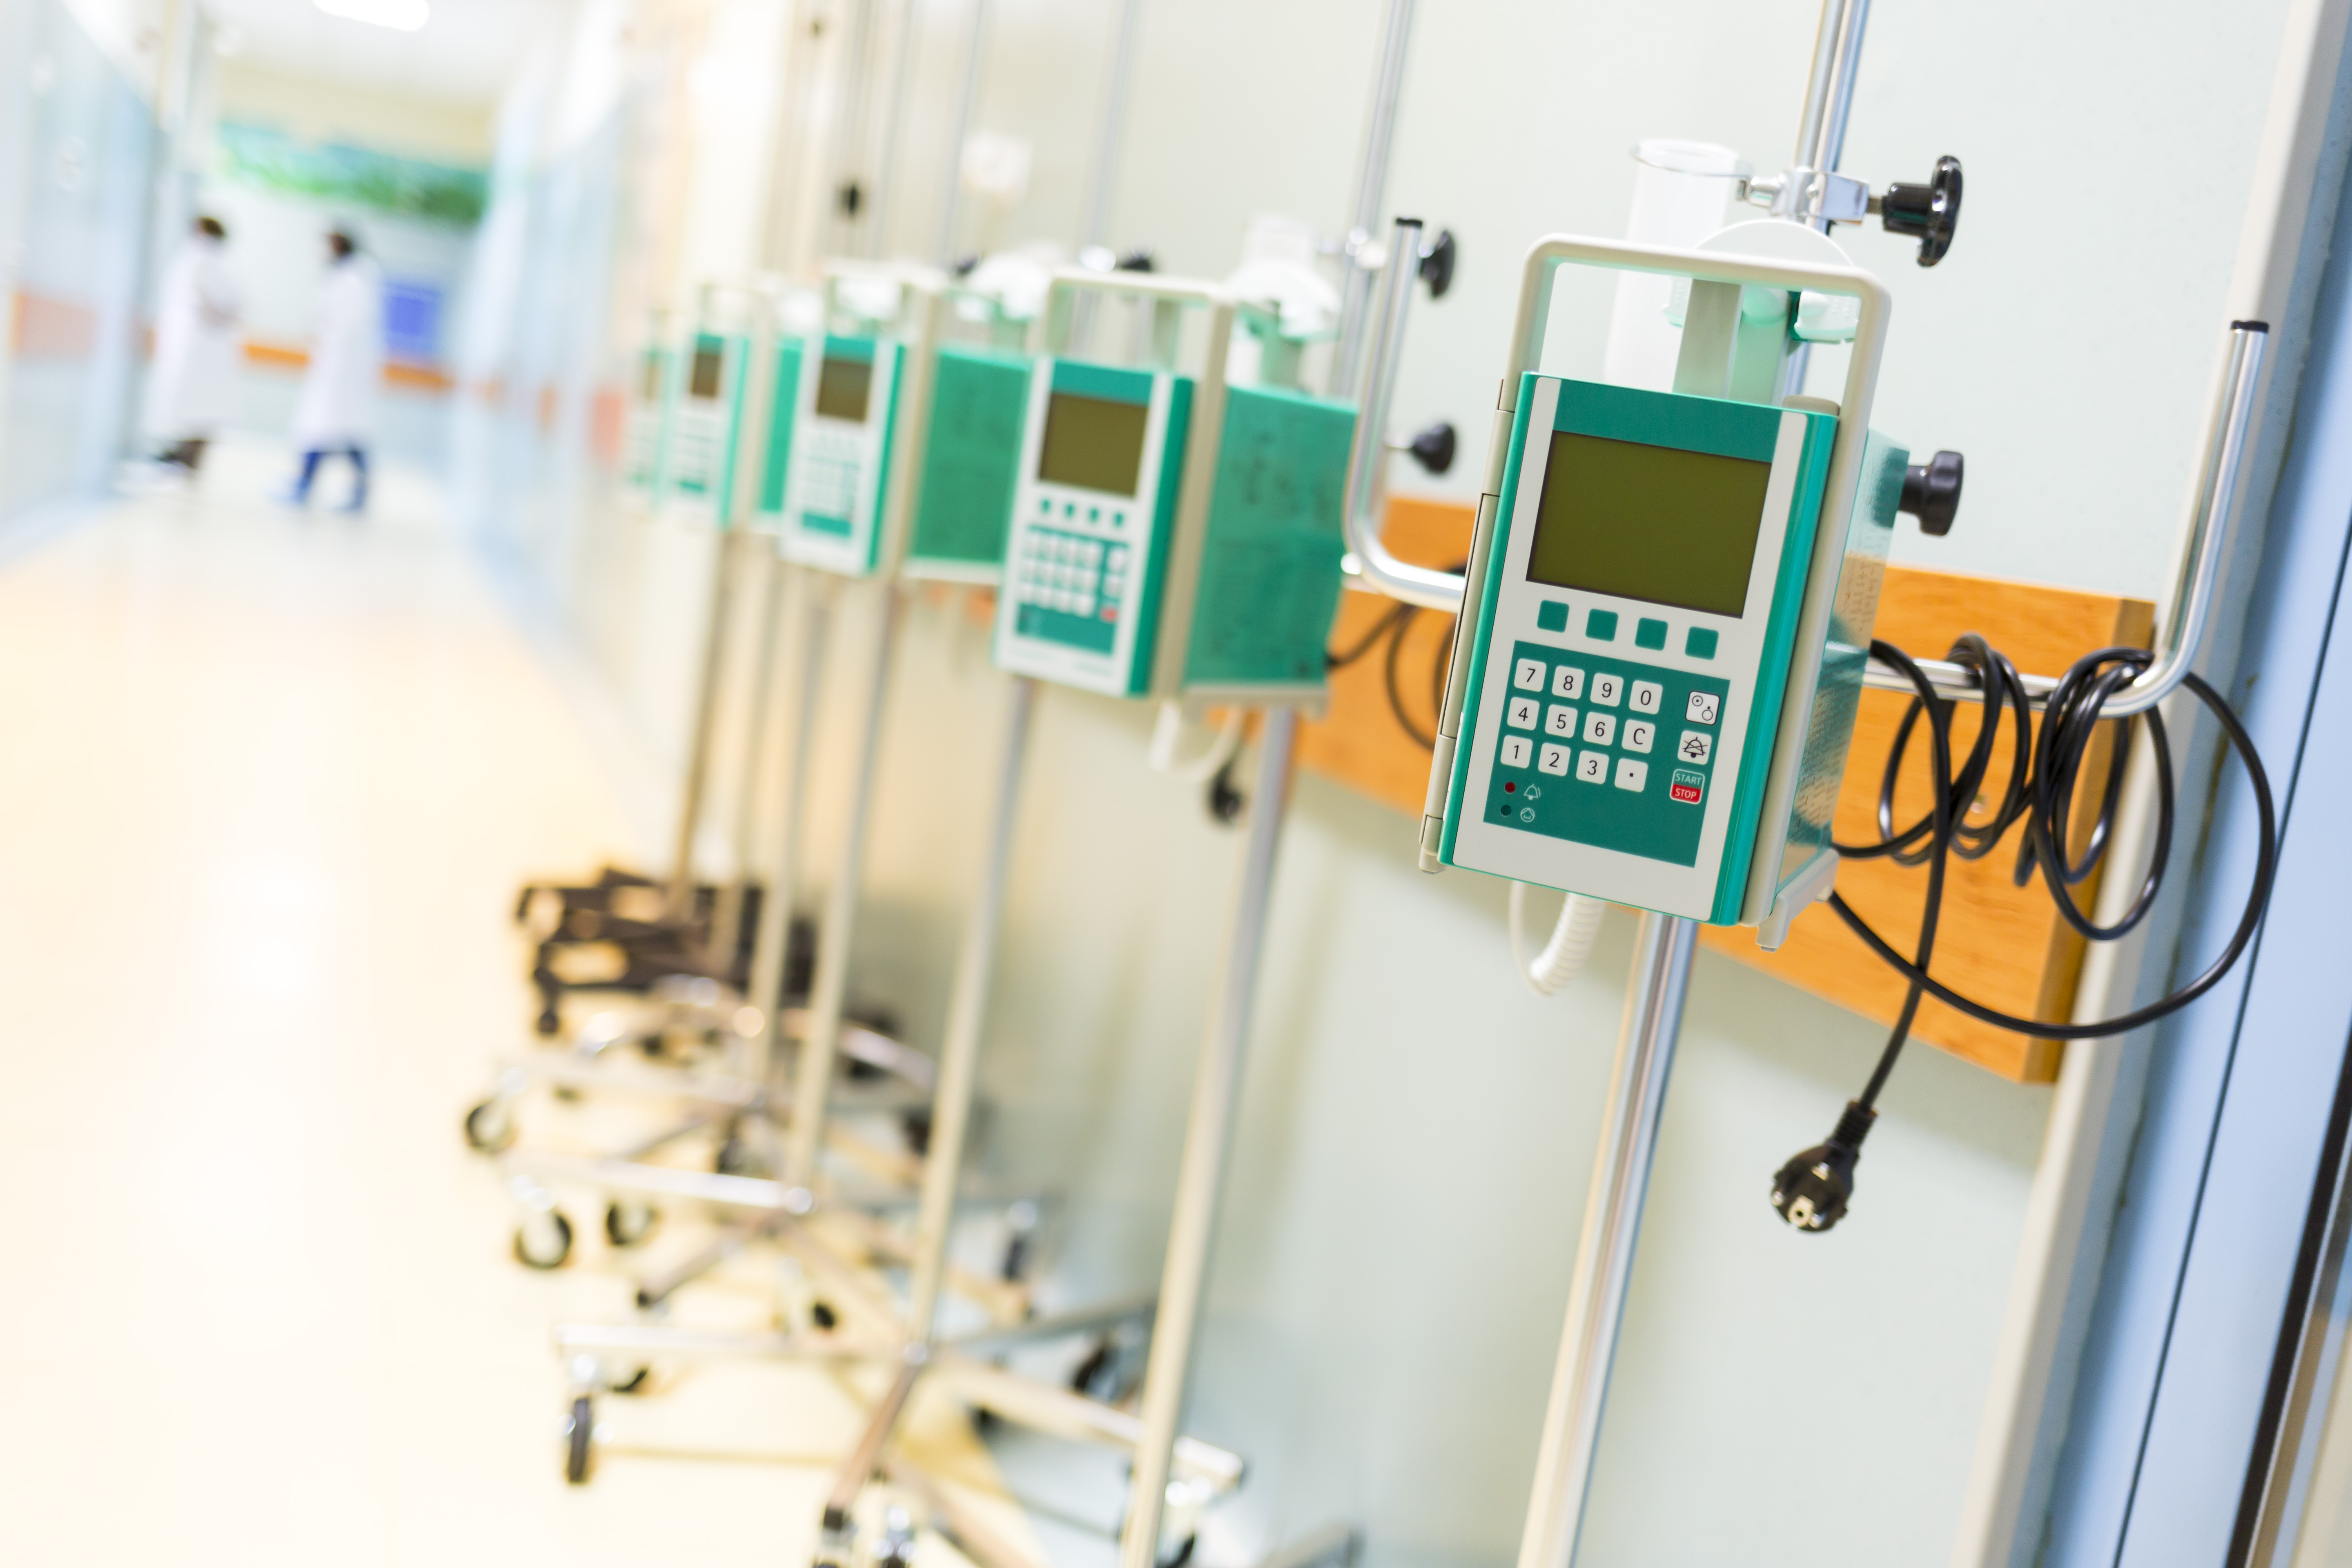 An infusion pump infuses fluids, medication or nutrients into a patient's circulatory system. It is generally used intravenously, although subcutaneous, arterial and epidural infusions are occasionally used.